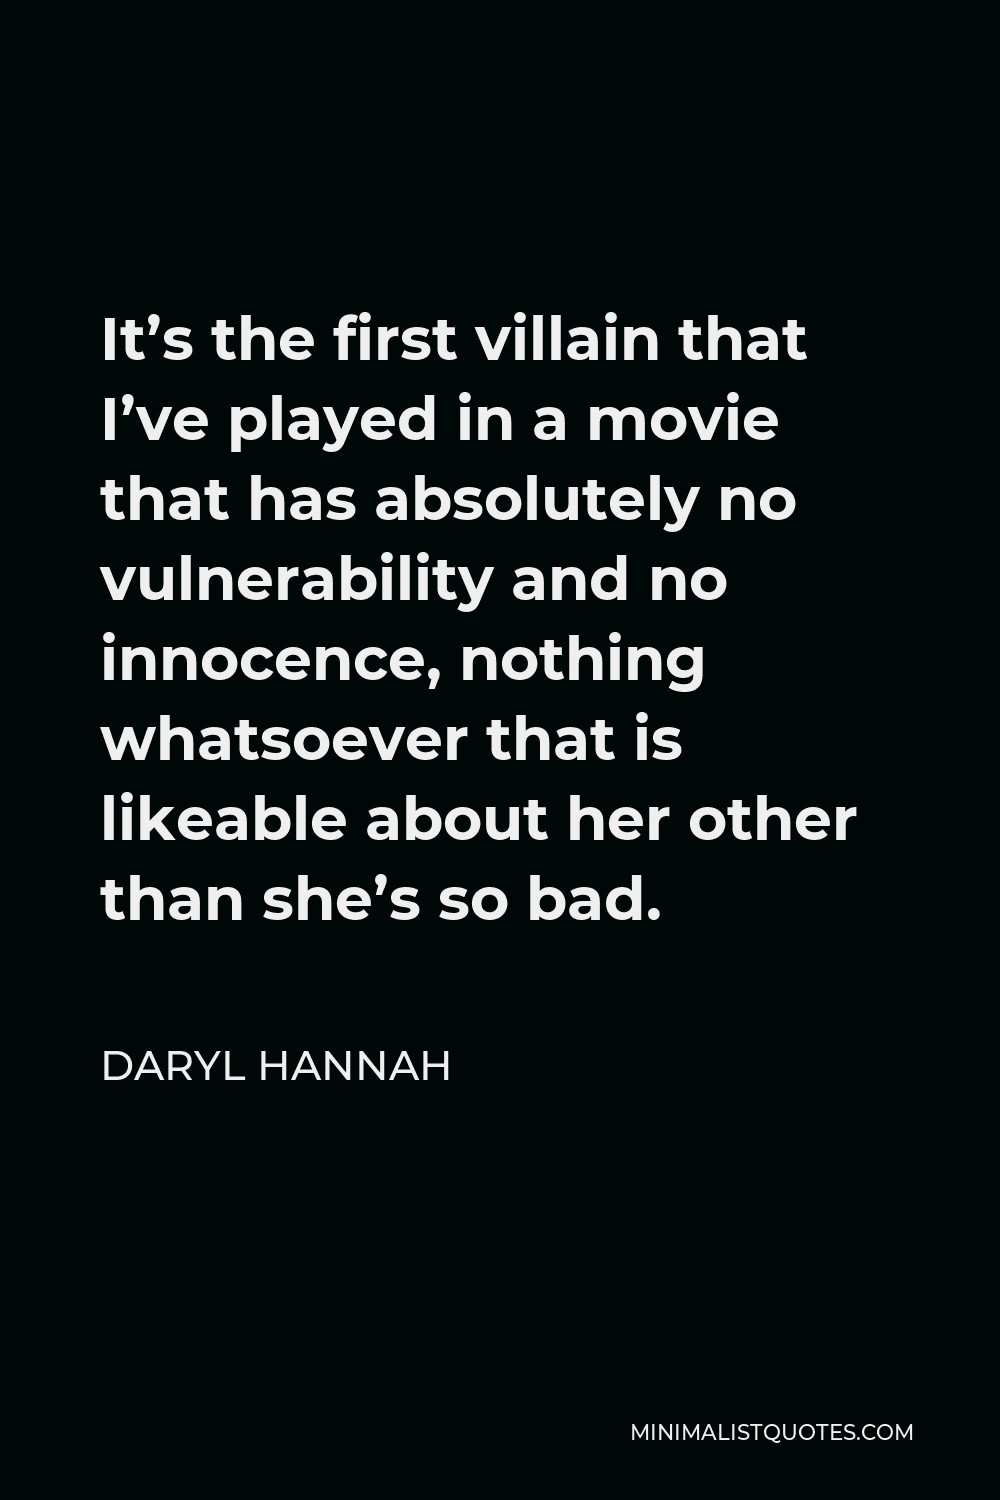 Daryl Hannah Quote - It’s the first villain that I’ve played in a movie that has absolutely no vulnerability and no innocence, nothing whatsoever that is likeable about her other than she’s so bad.